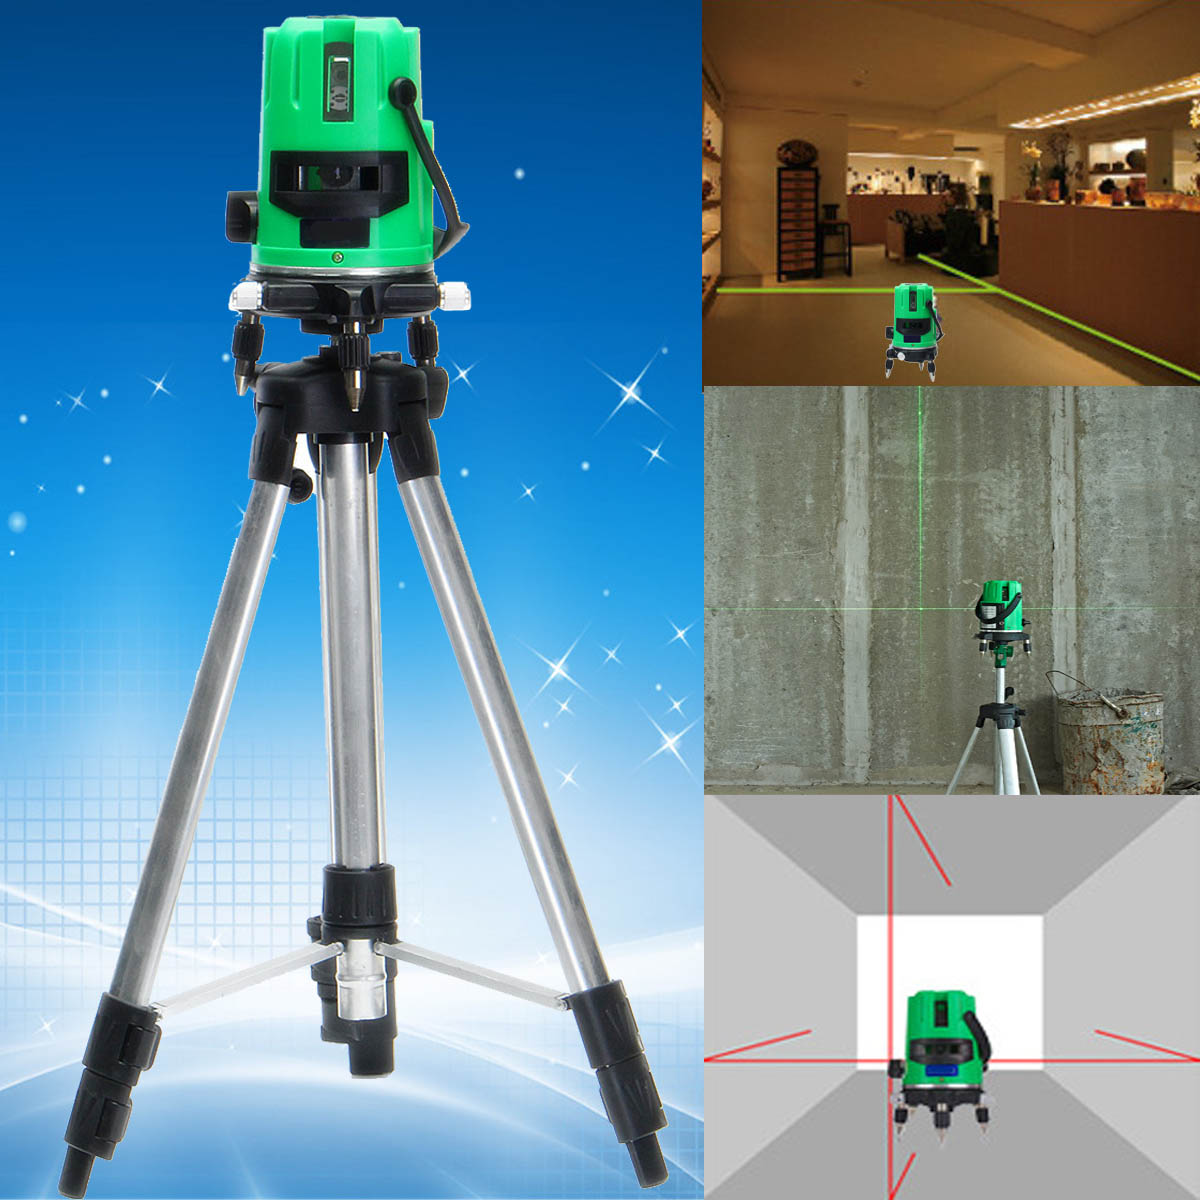 Green-2-Line-2-Points-Laser-Level-360-Rotary-Laser-Line-Self-Leveling-with-Tripod-1166735-7